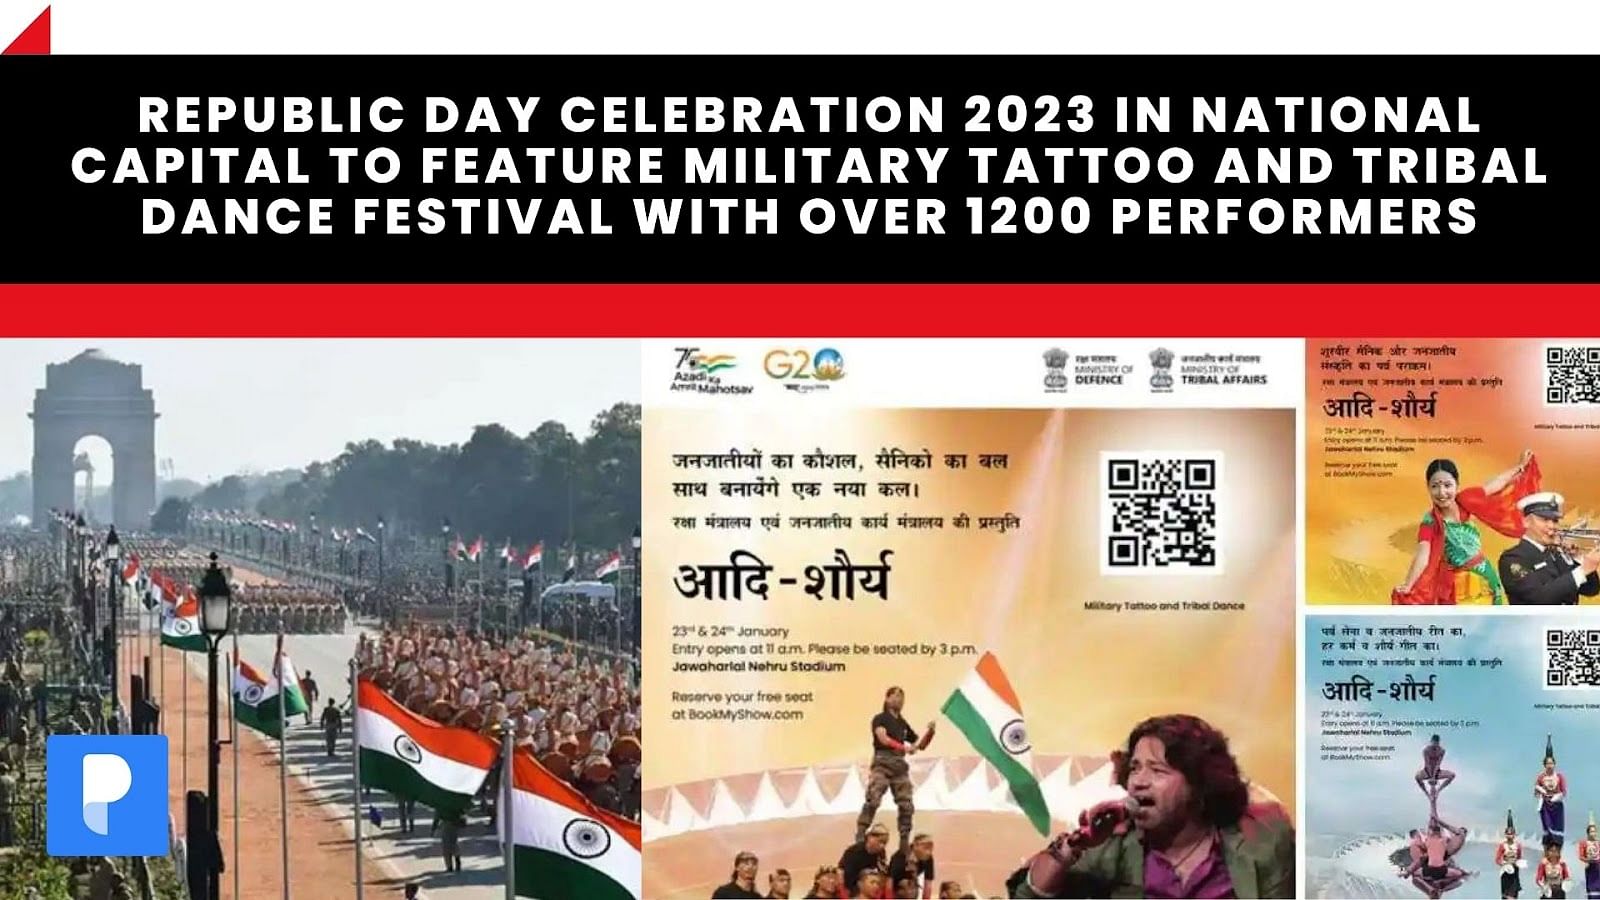 MINISTRY OF DEFENCE GEARS UP TO CELEBRATE REPUBLIC DAY WITH MILITARY TATTOO  TRIBAL DANCE